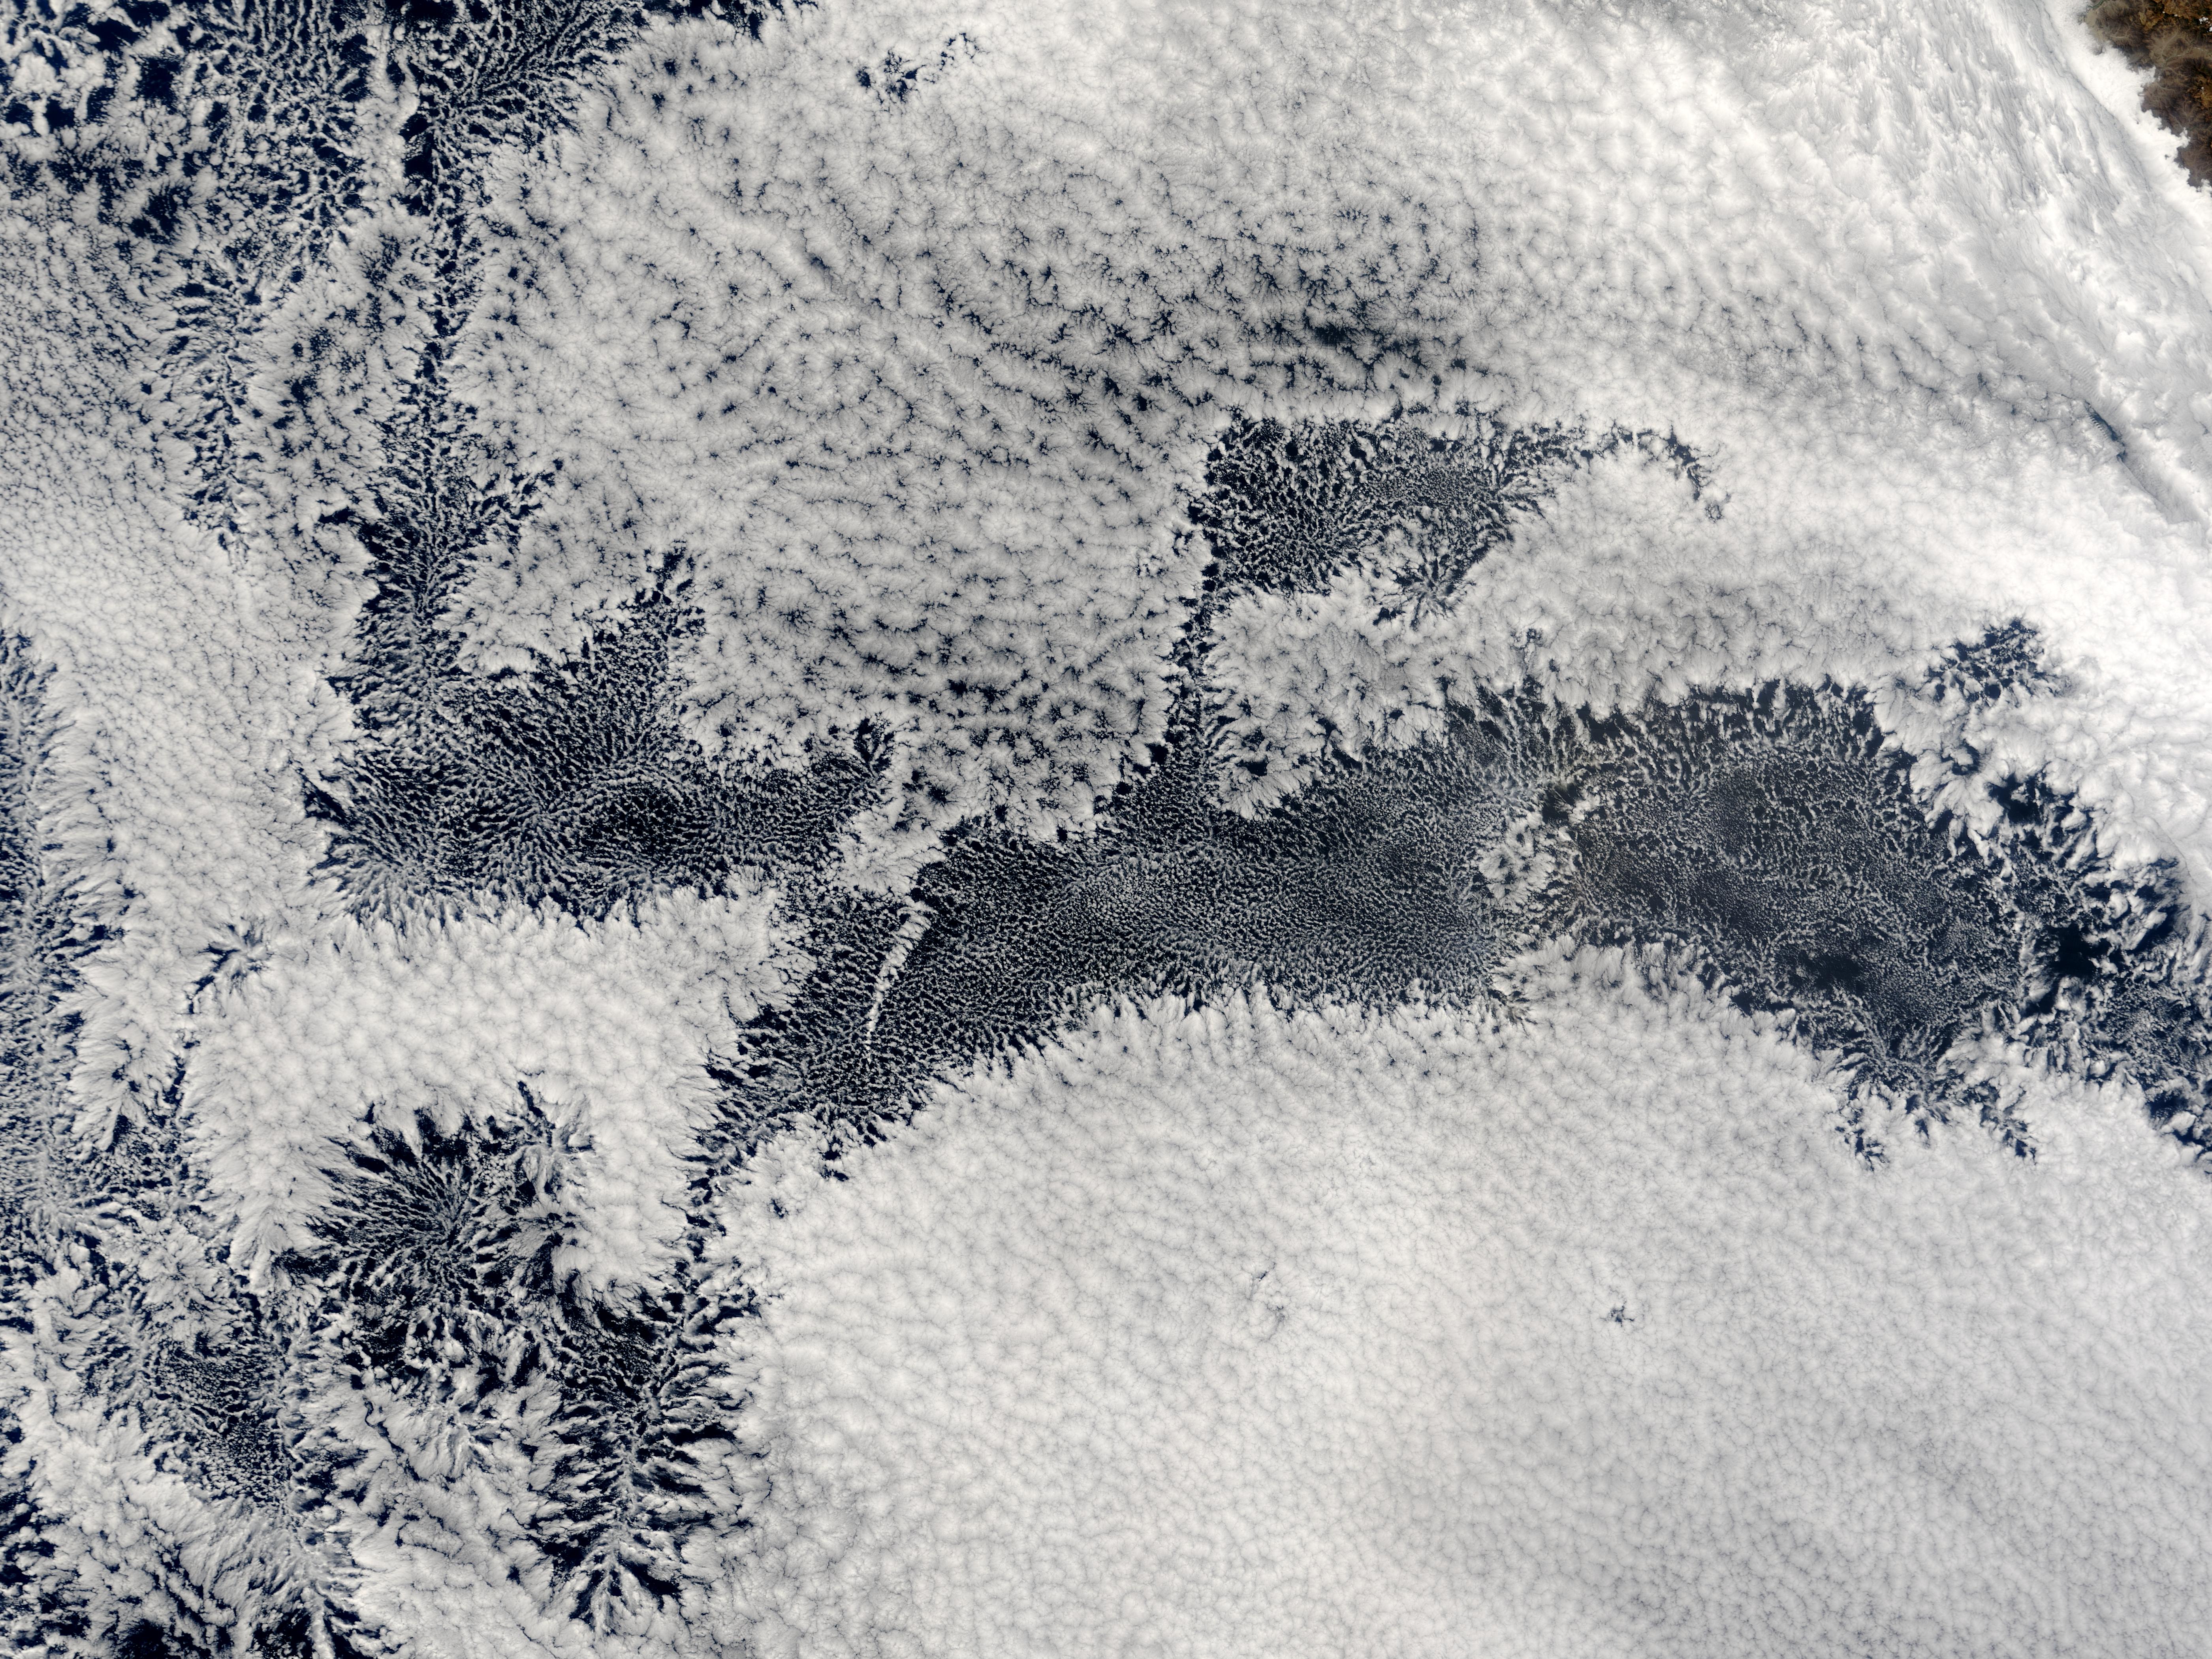 Open-cell and closed-cell clouds off Peru, Pacific Ocean - related image preview